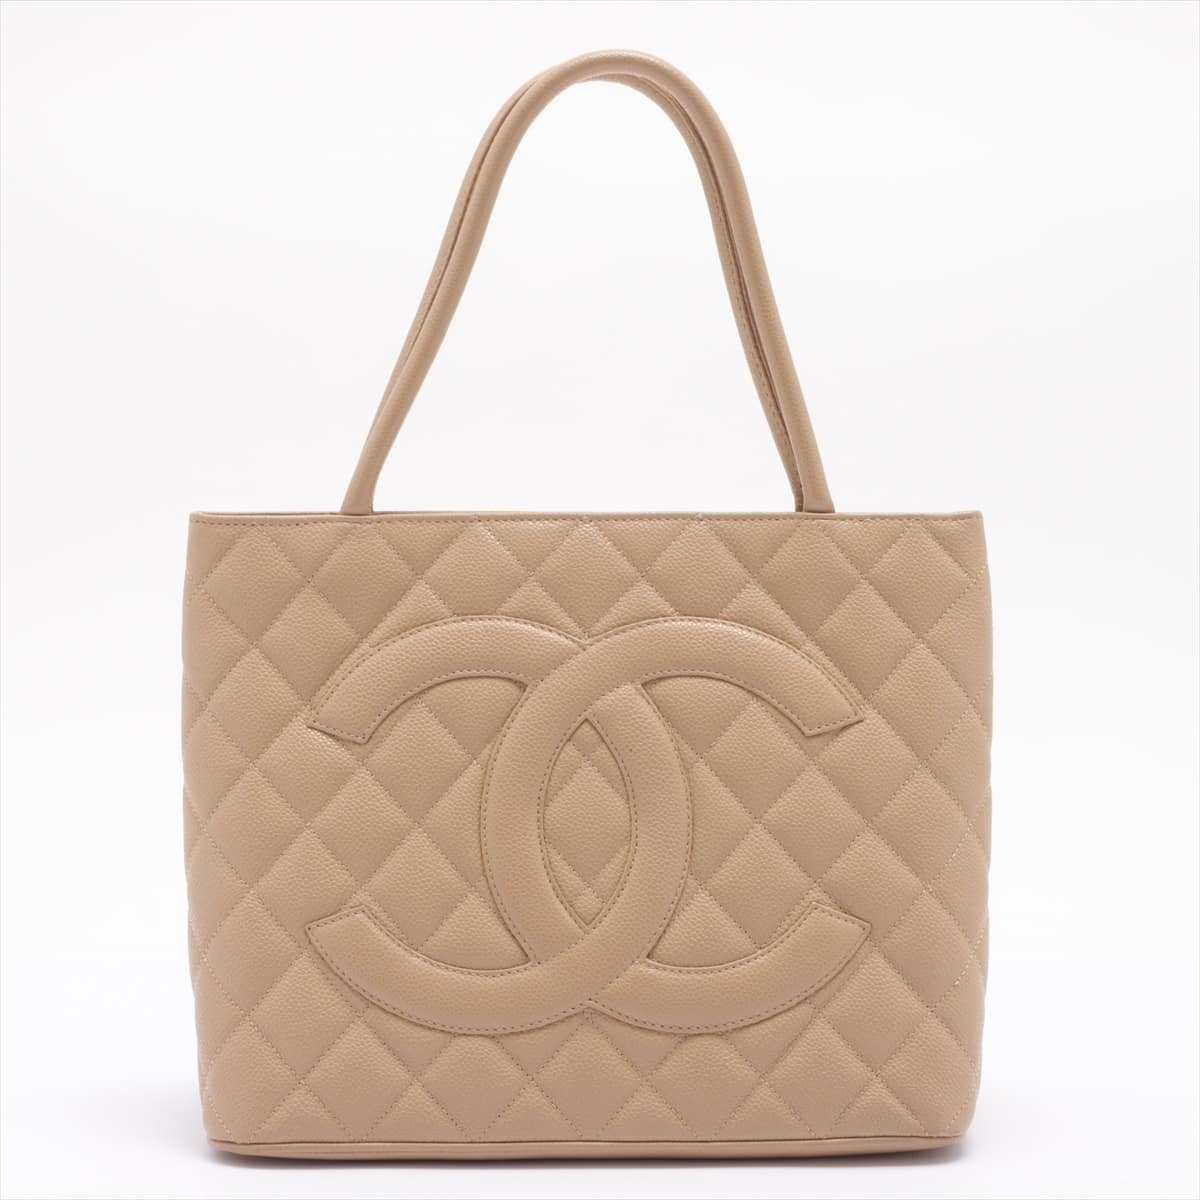 Chanel Re-release Caviarskin Tote bag Beige Gold Metal fittings 6XXXXXX